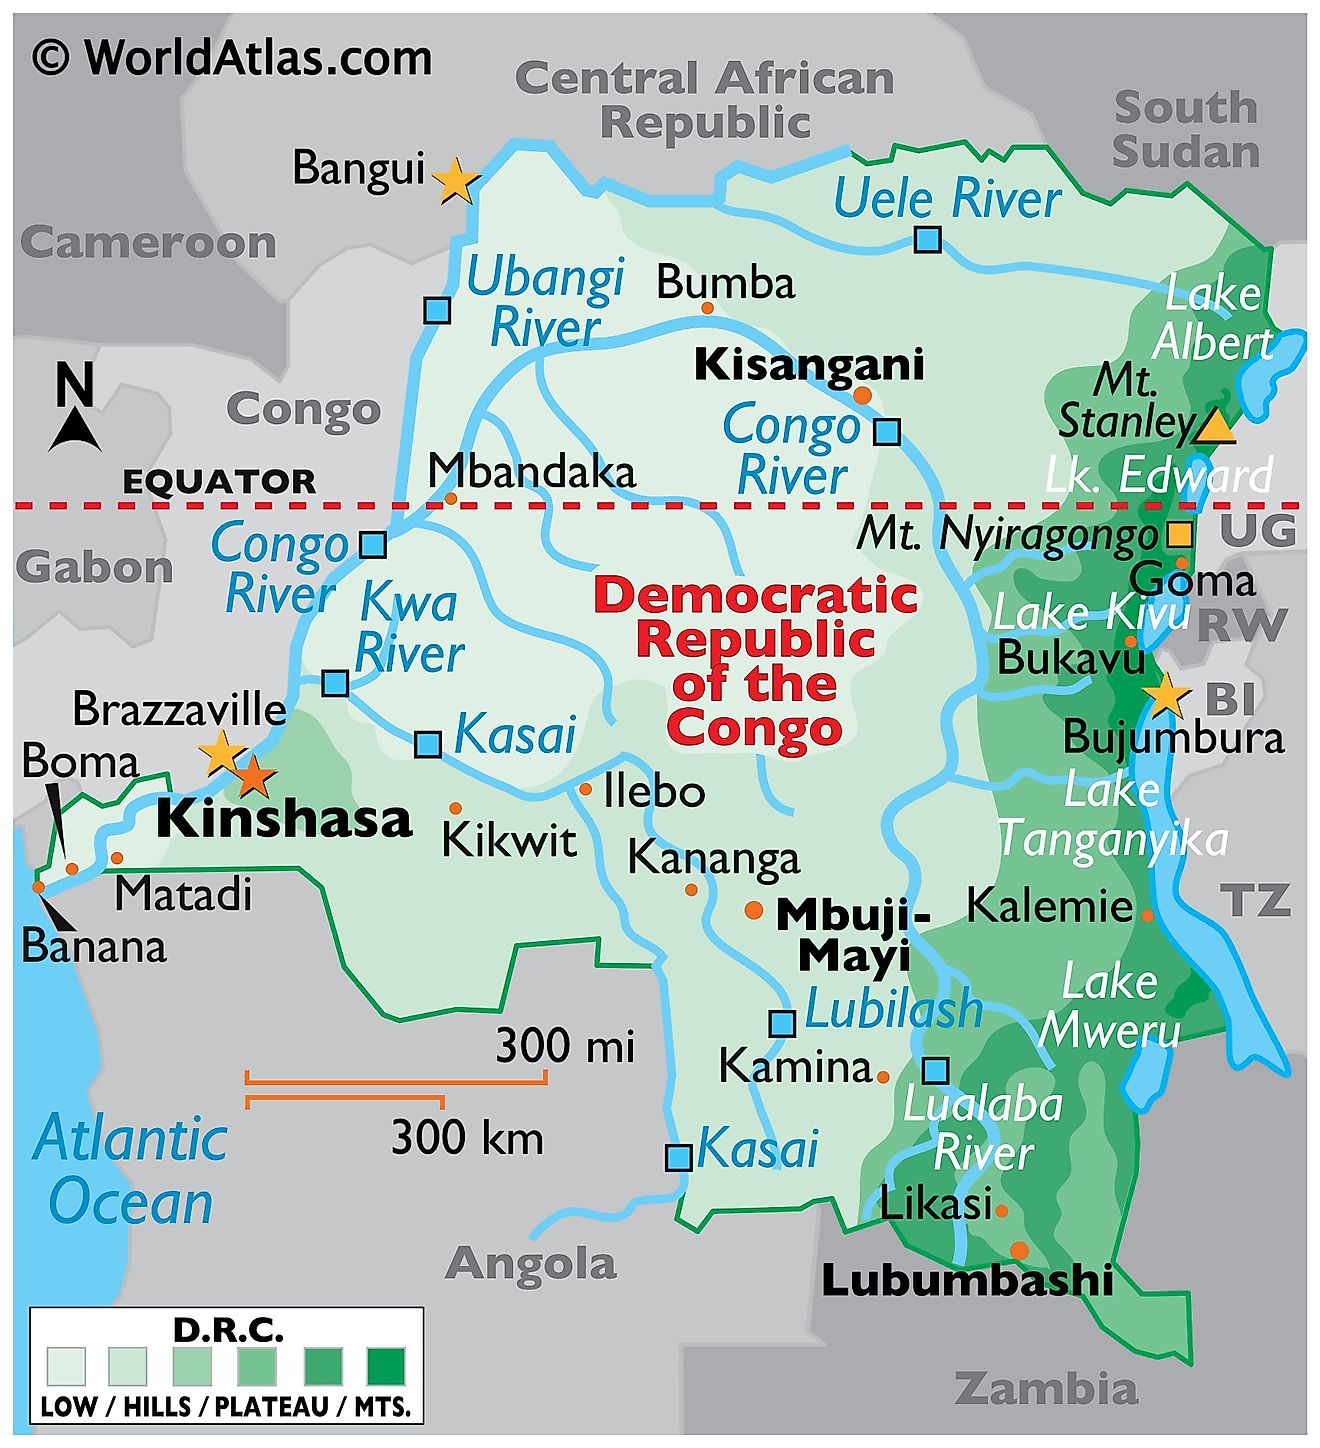 Physical Map of the Democratic Republic of Congo with state boundaries, relief, major lakes, mountains, extreme points, major cities, and rivers.